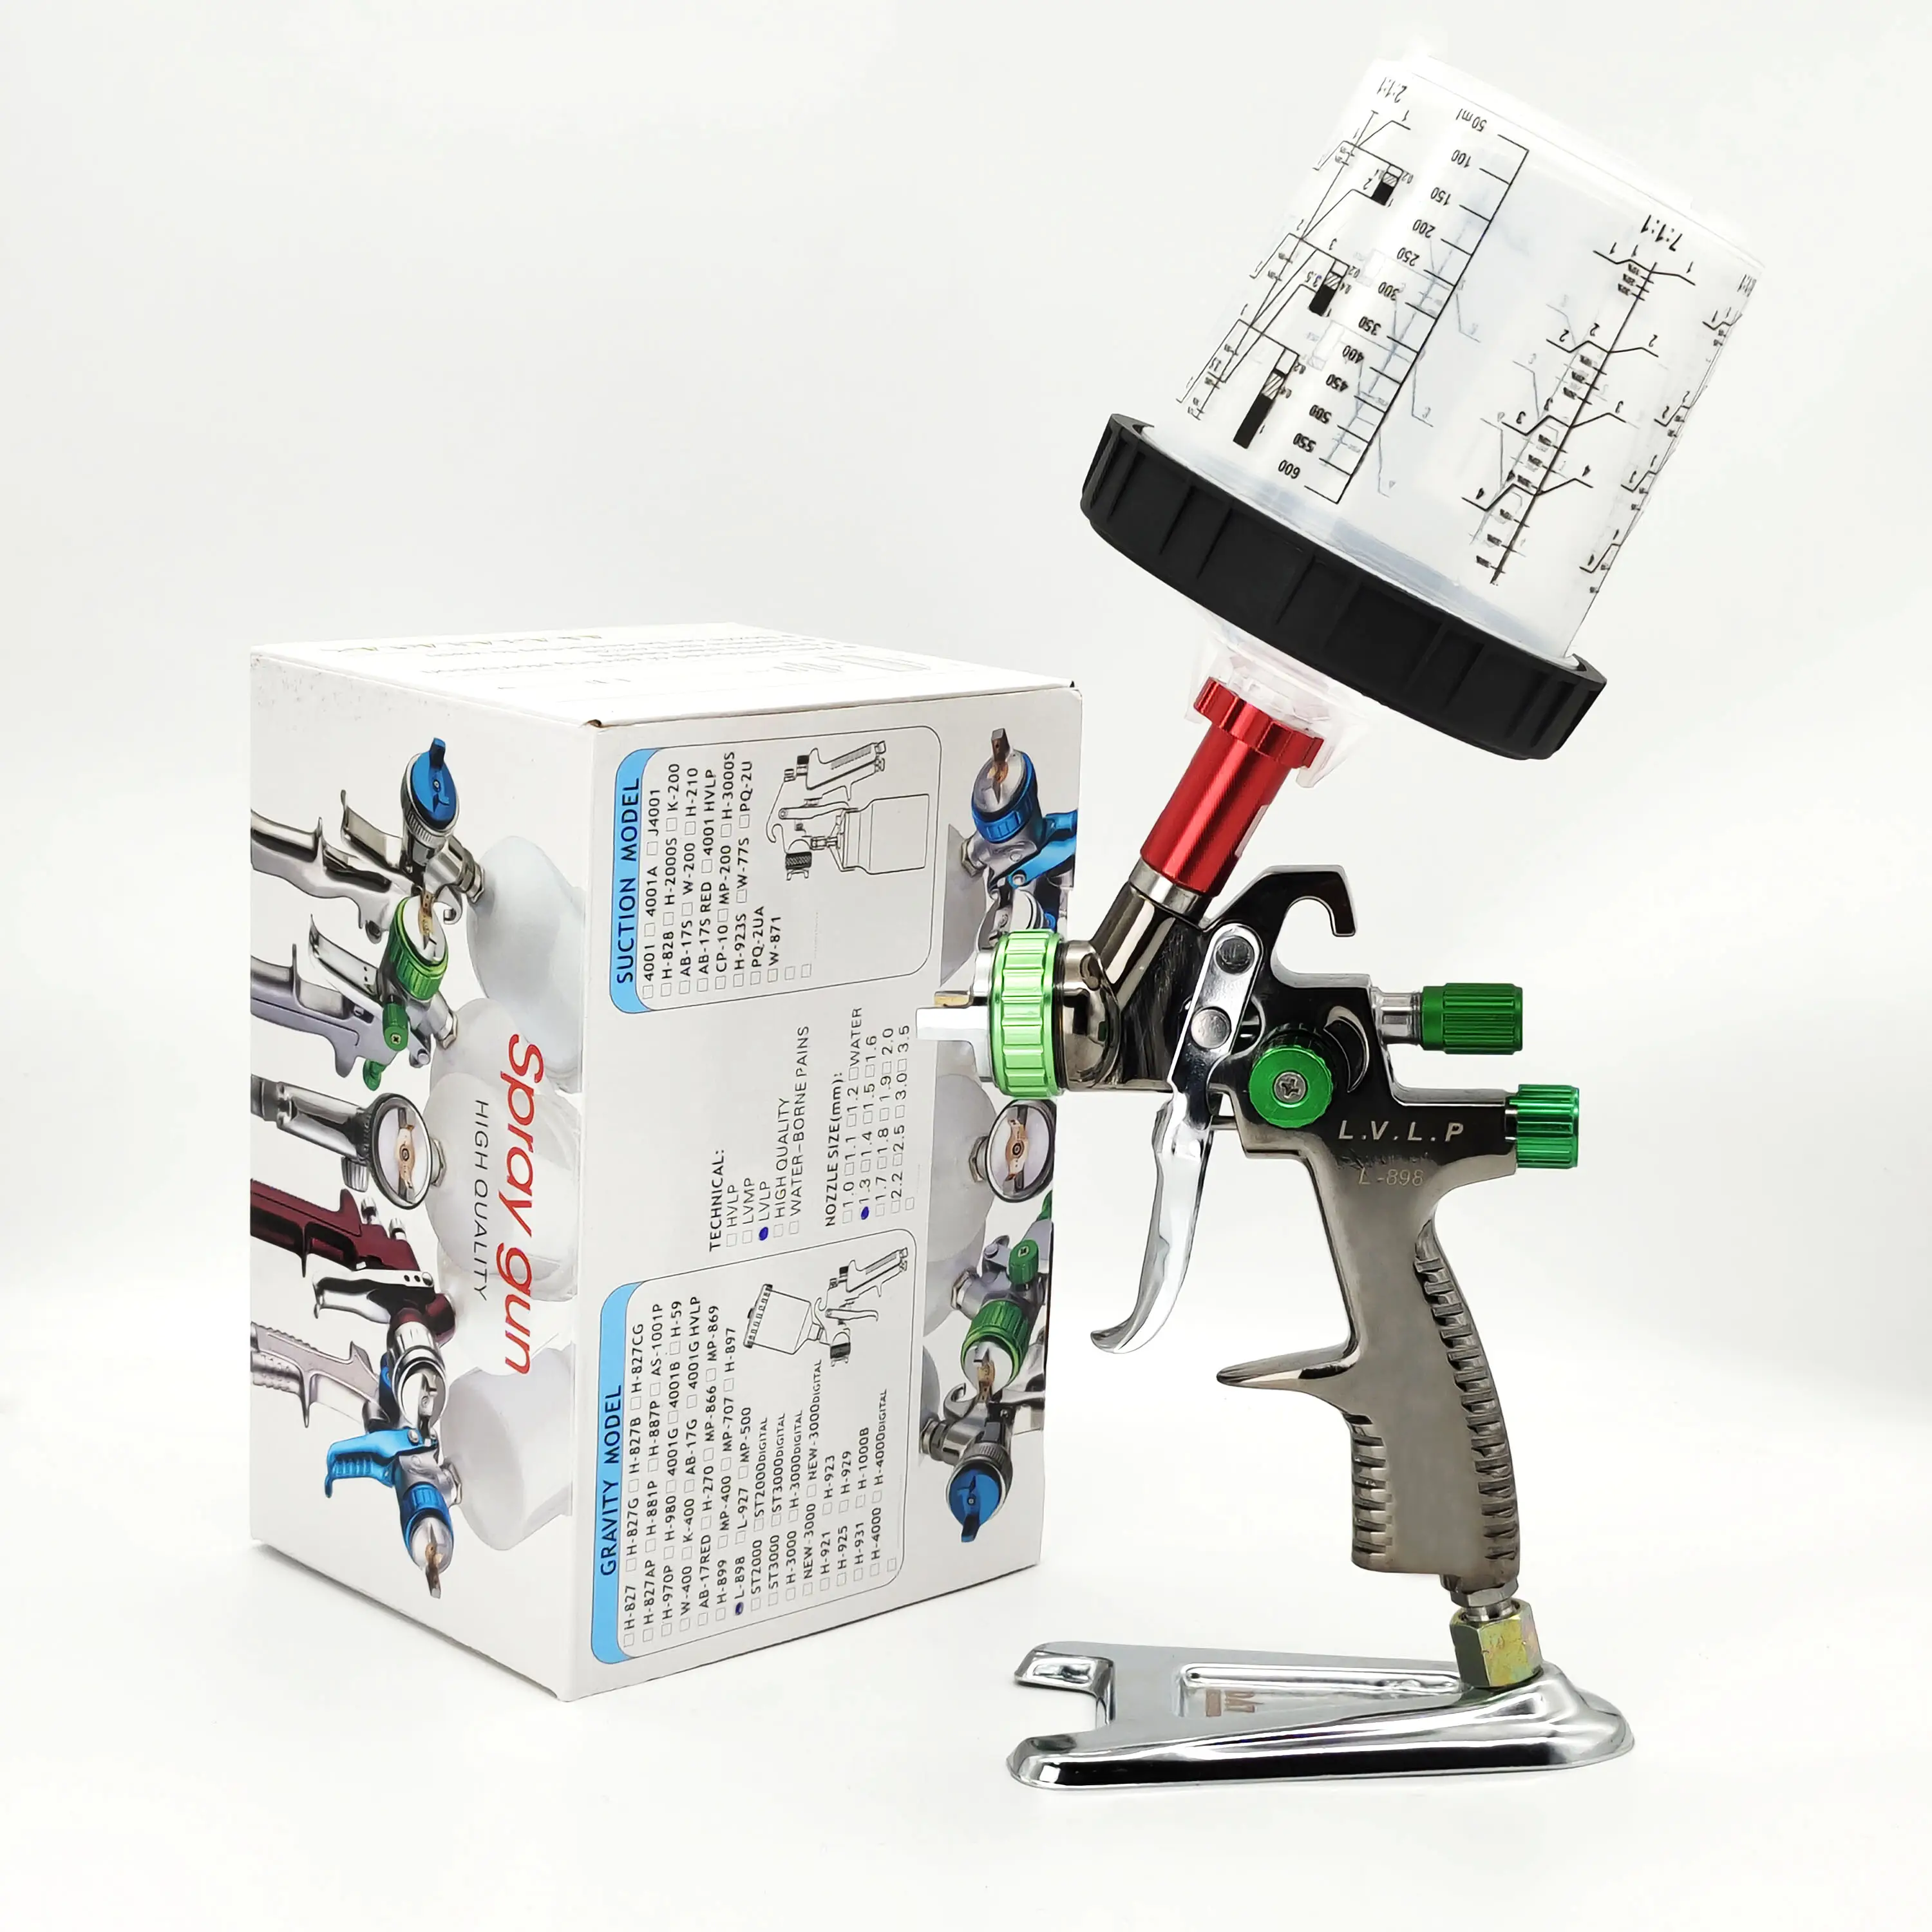 Professional LVLP SPRAY GUN L-898 1.3MM NOZZLE car paint spray gun with pps adapter 600CC PPS CUP